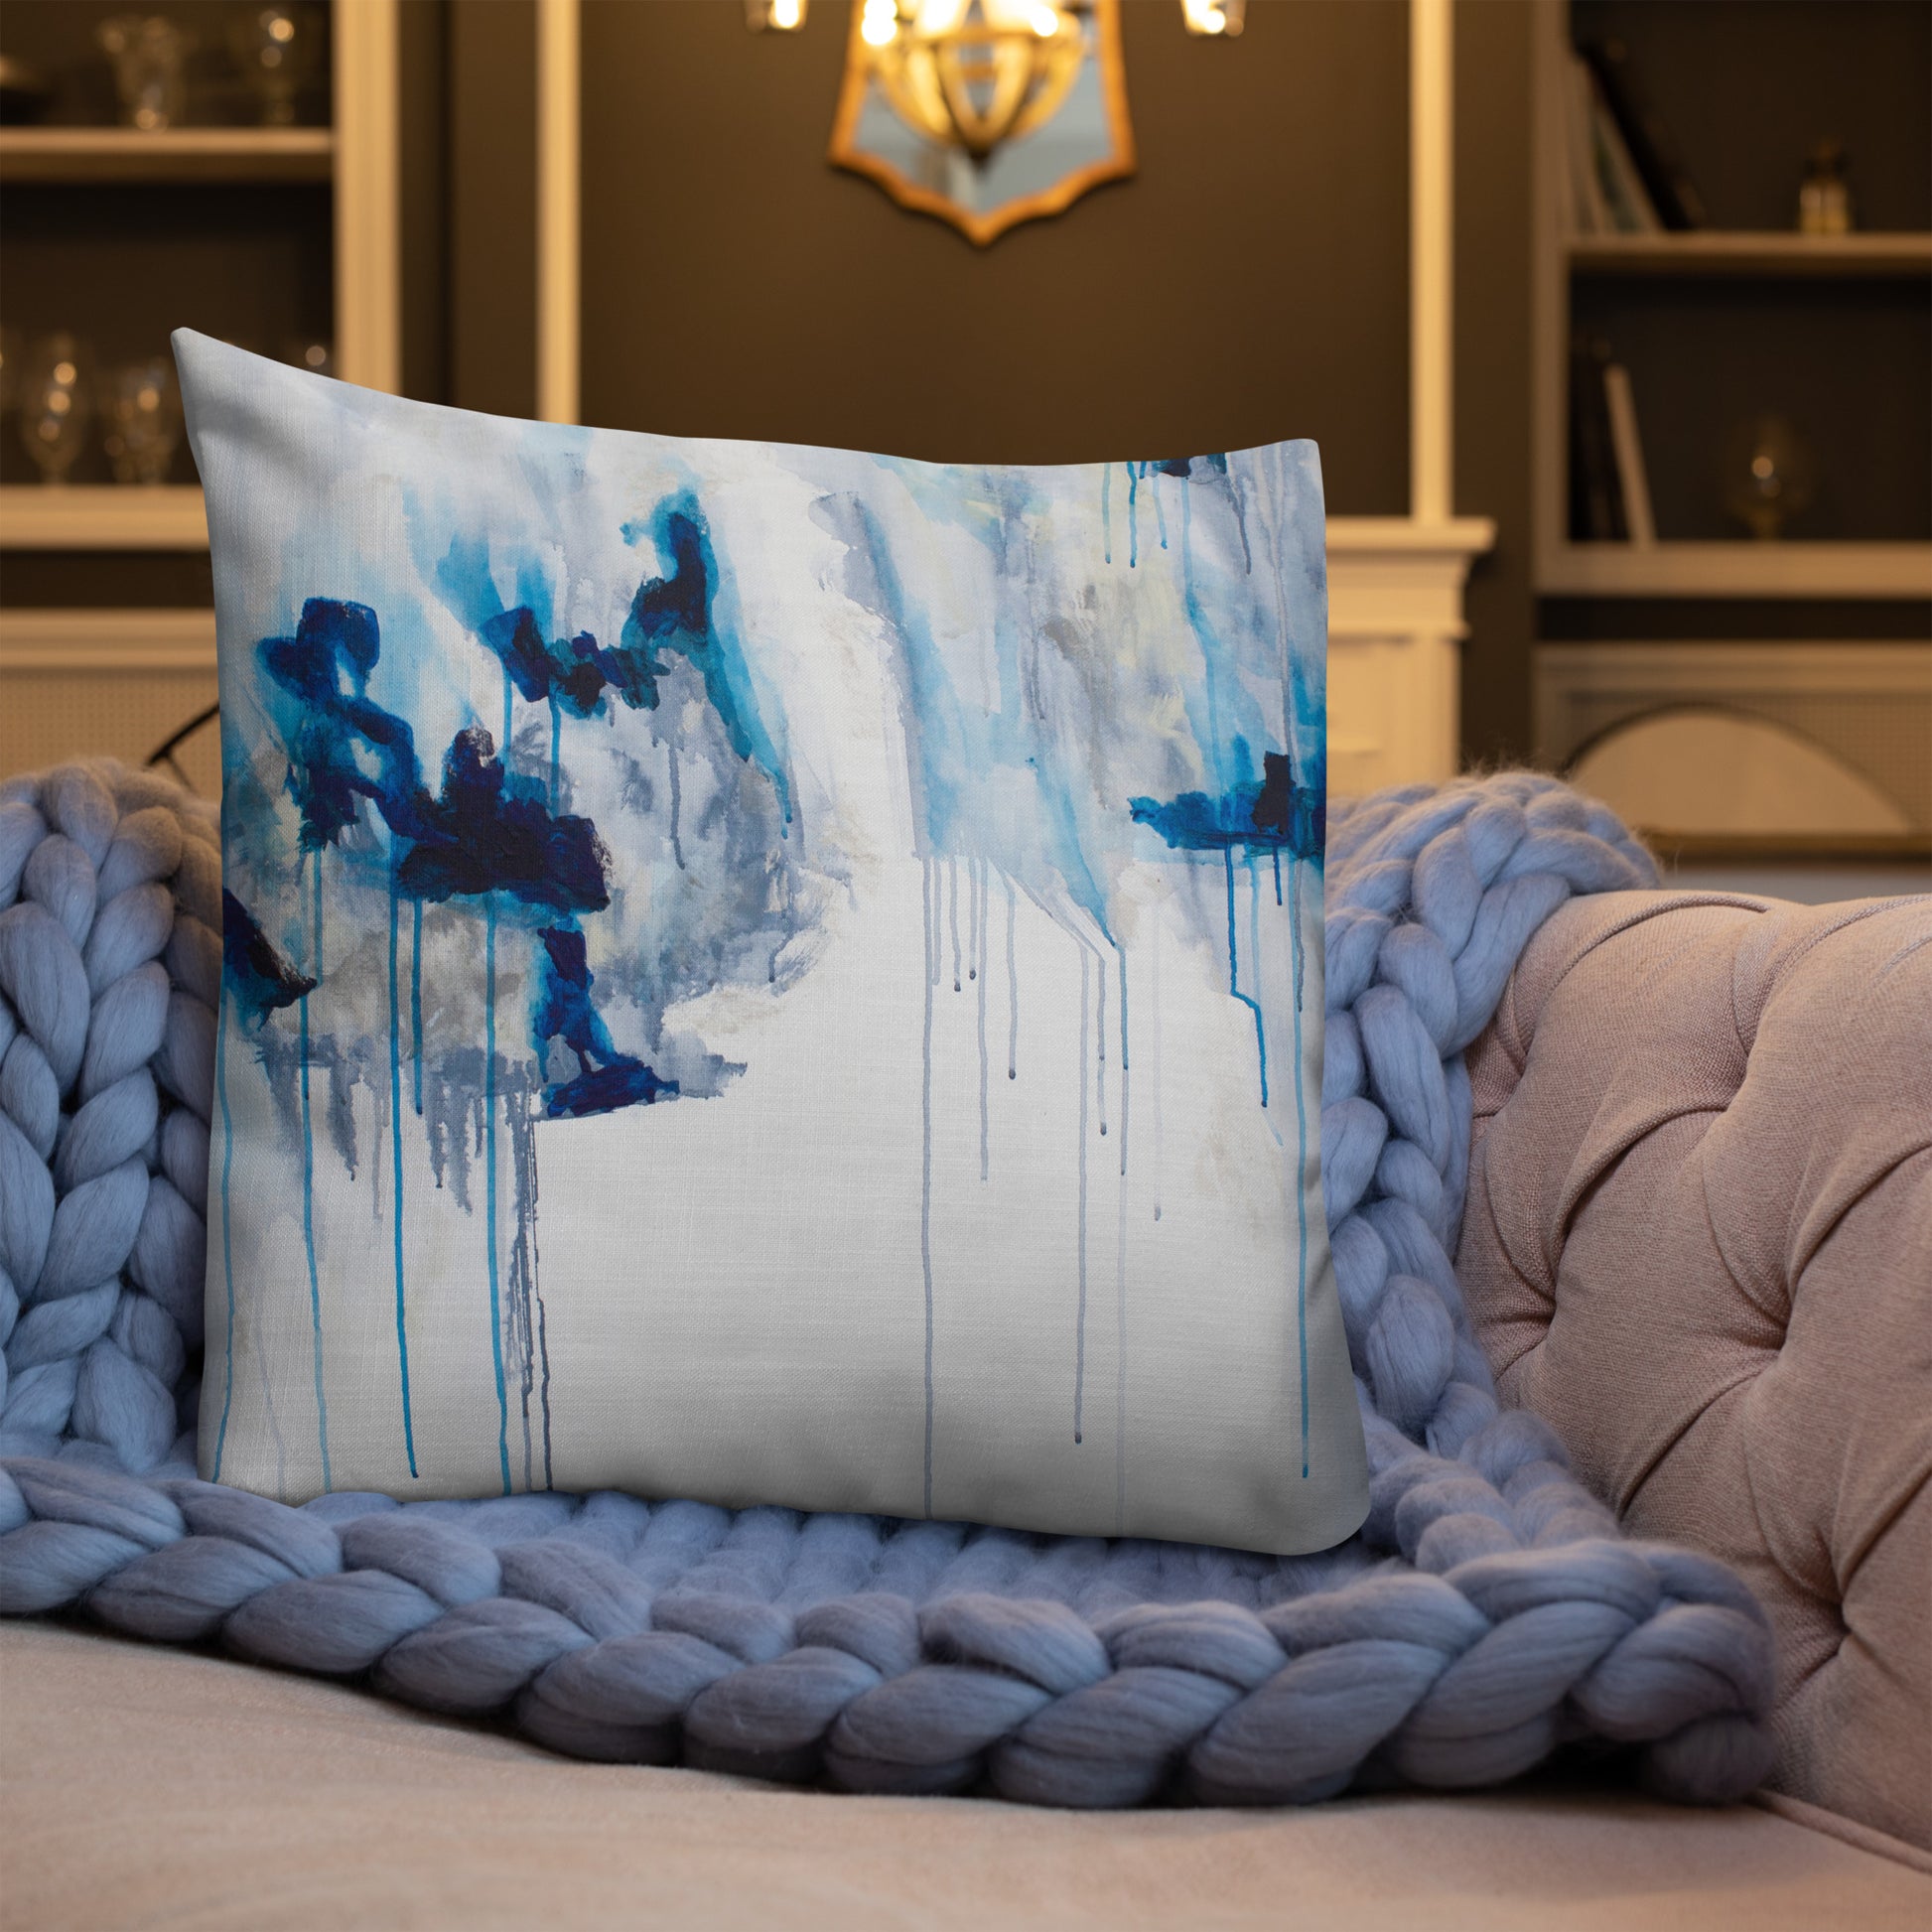 Trust the timing of your life – Premium Pillow - Design with Ali, LLC